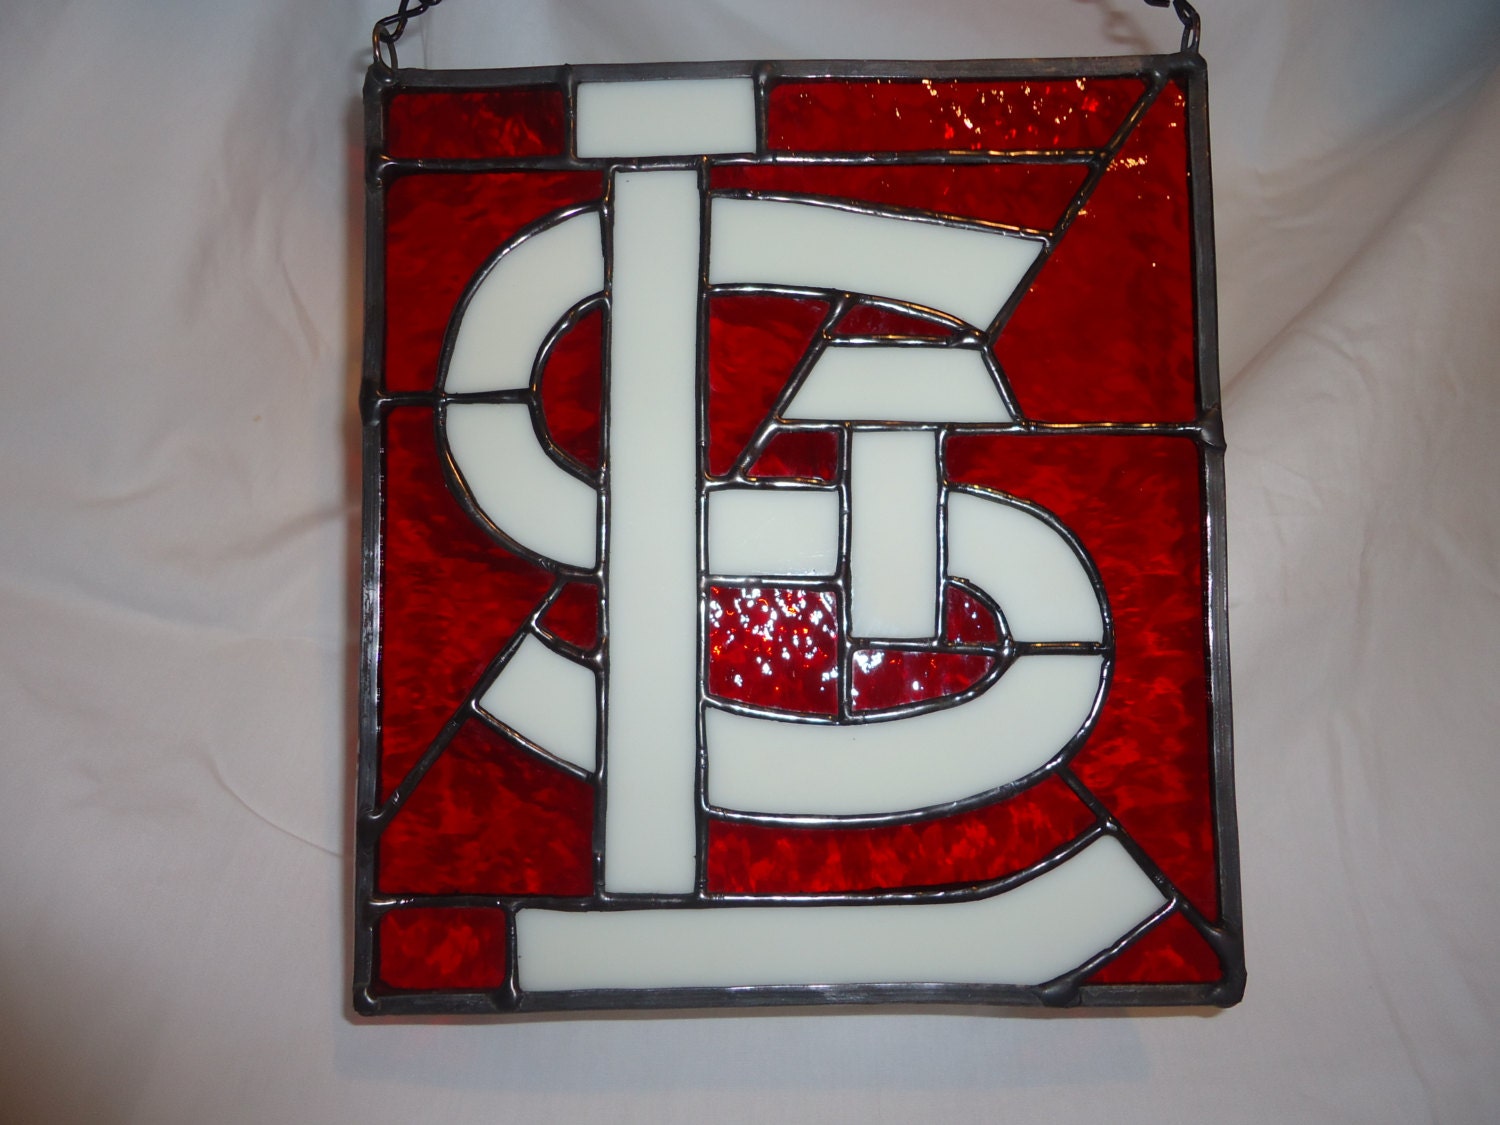 St Louis Cardinals stained glass suncatcher by FaerieStainedGlass